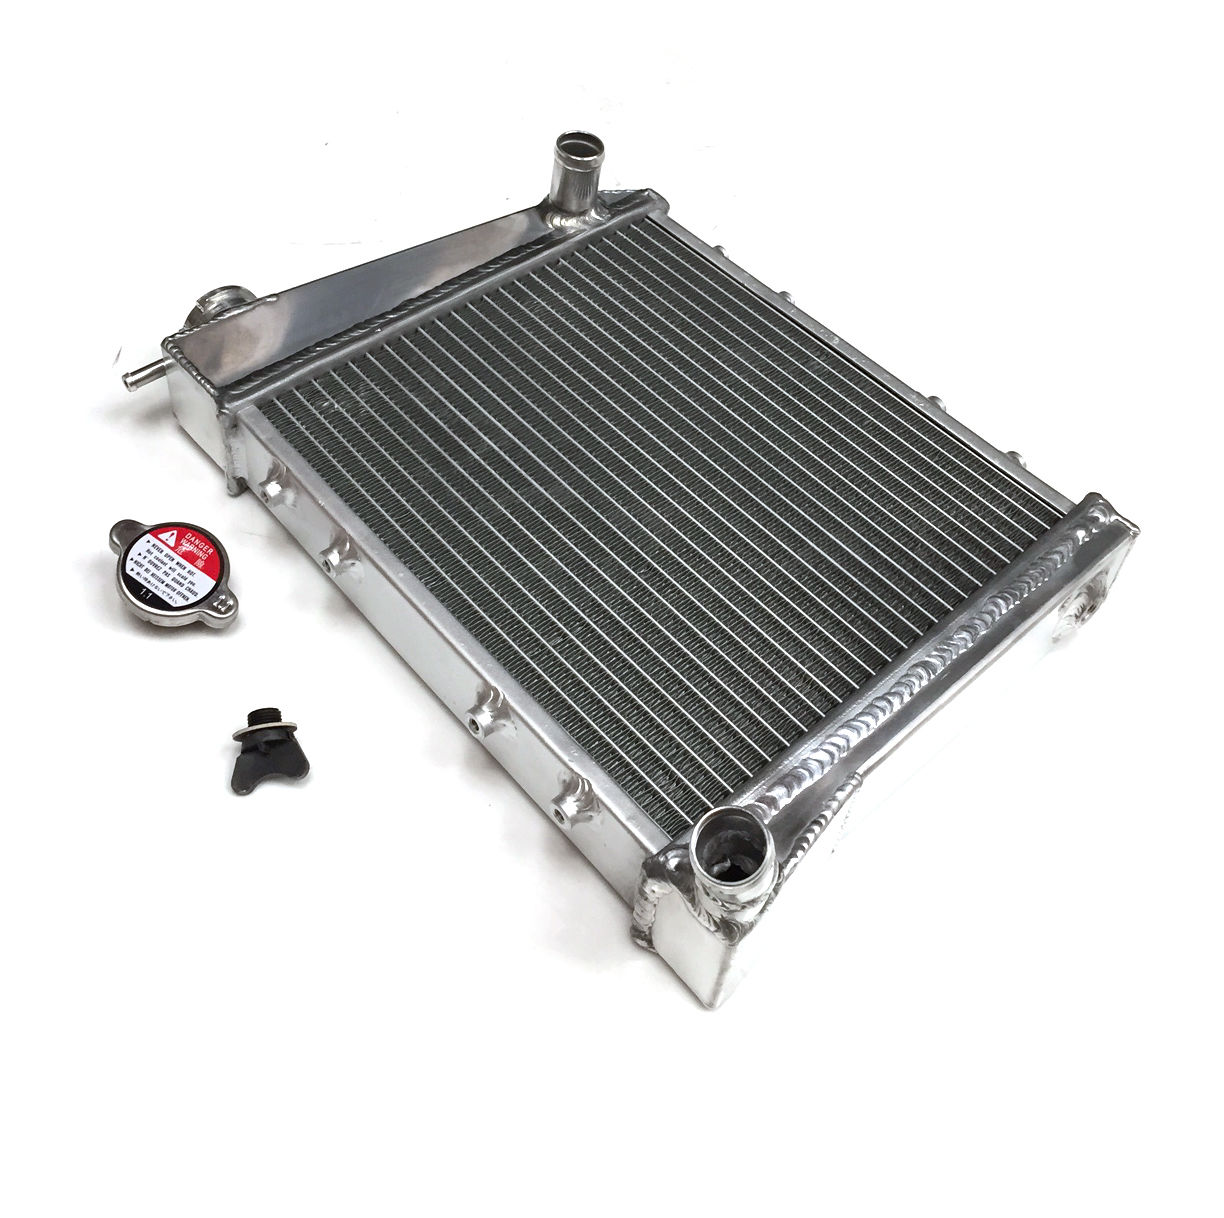 CLASSIC MINI ALLOY 2 CORE ALLOY  RADIATOR - ANY SIDE FITTING TYPE 1959-1991 / SP-AR07-2